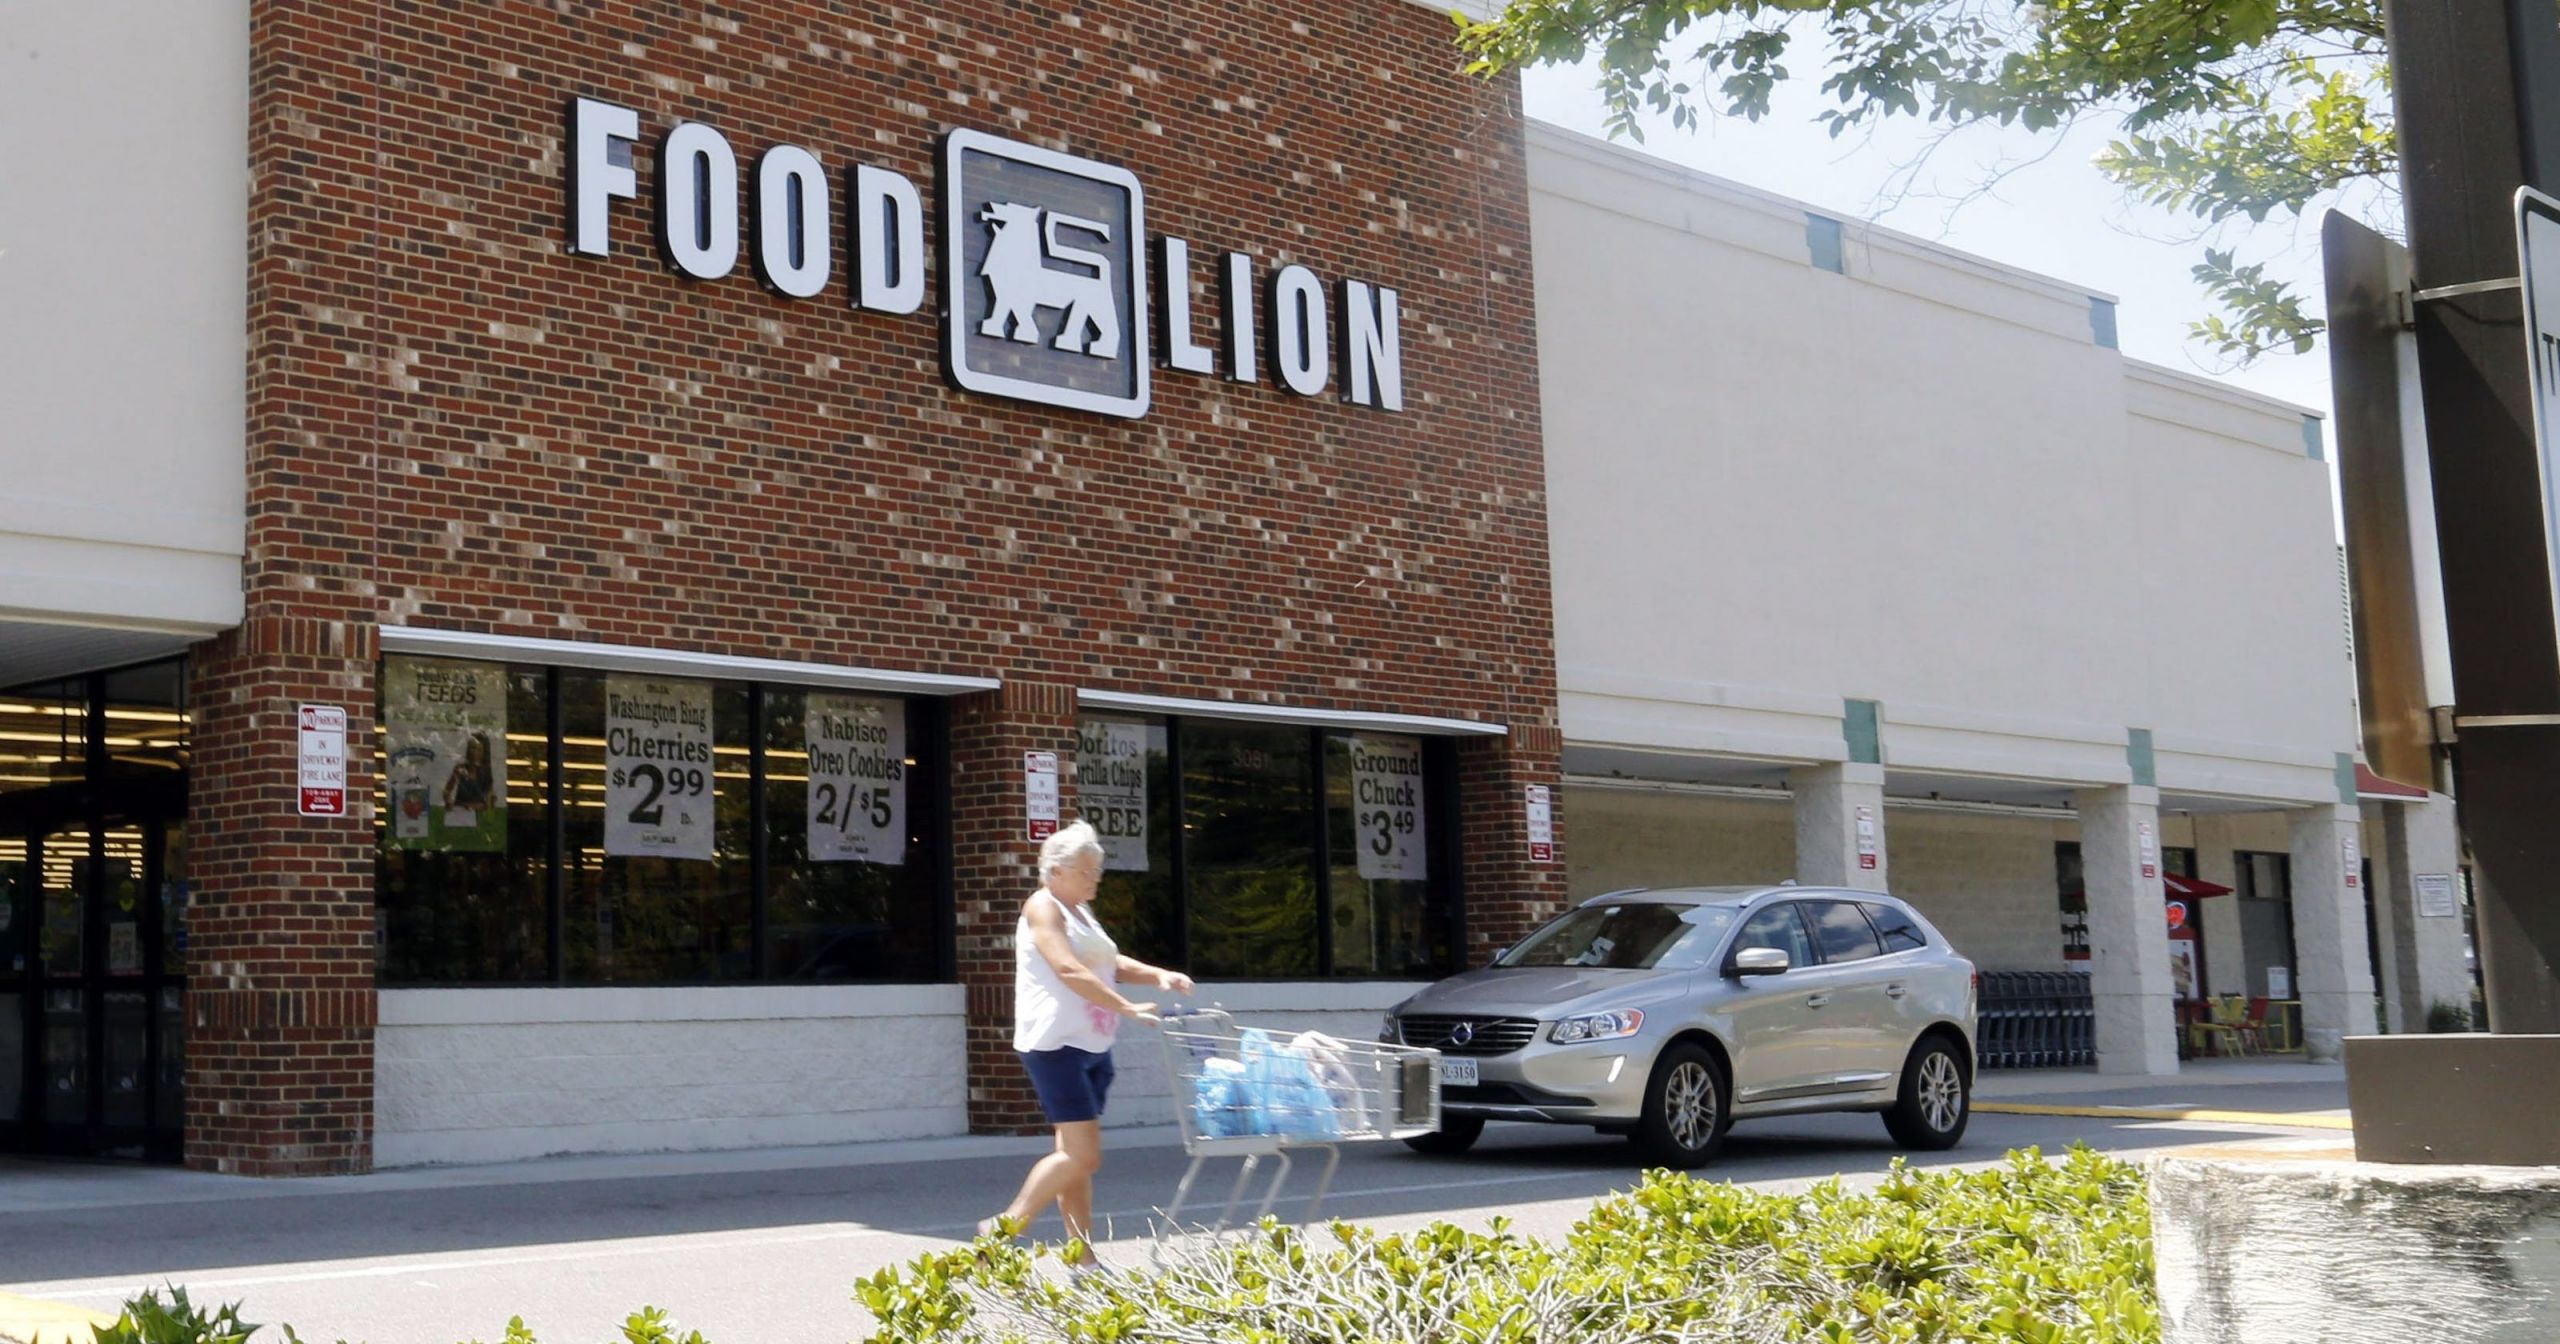 Food Lion Open Thanksgiving
 Food Lion Piggly Wiggly biscuits recalled for listeria